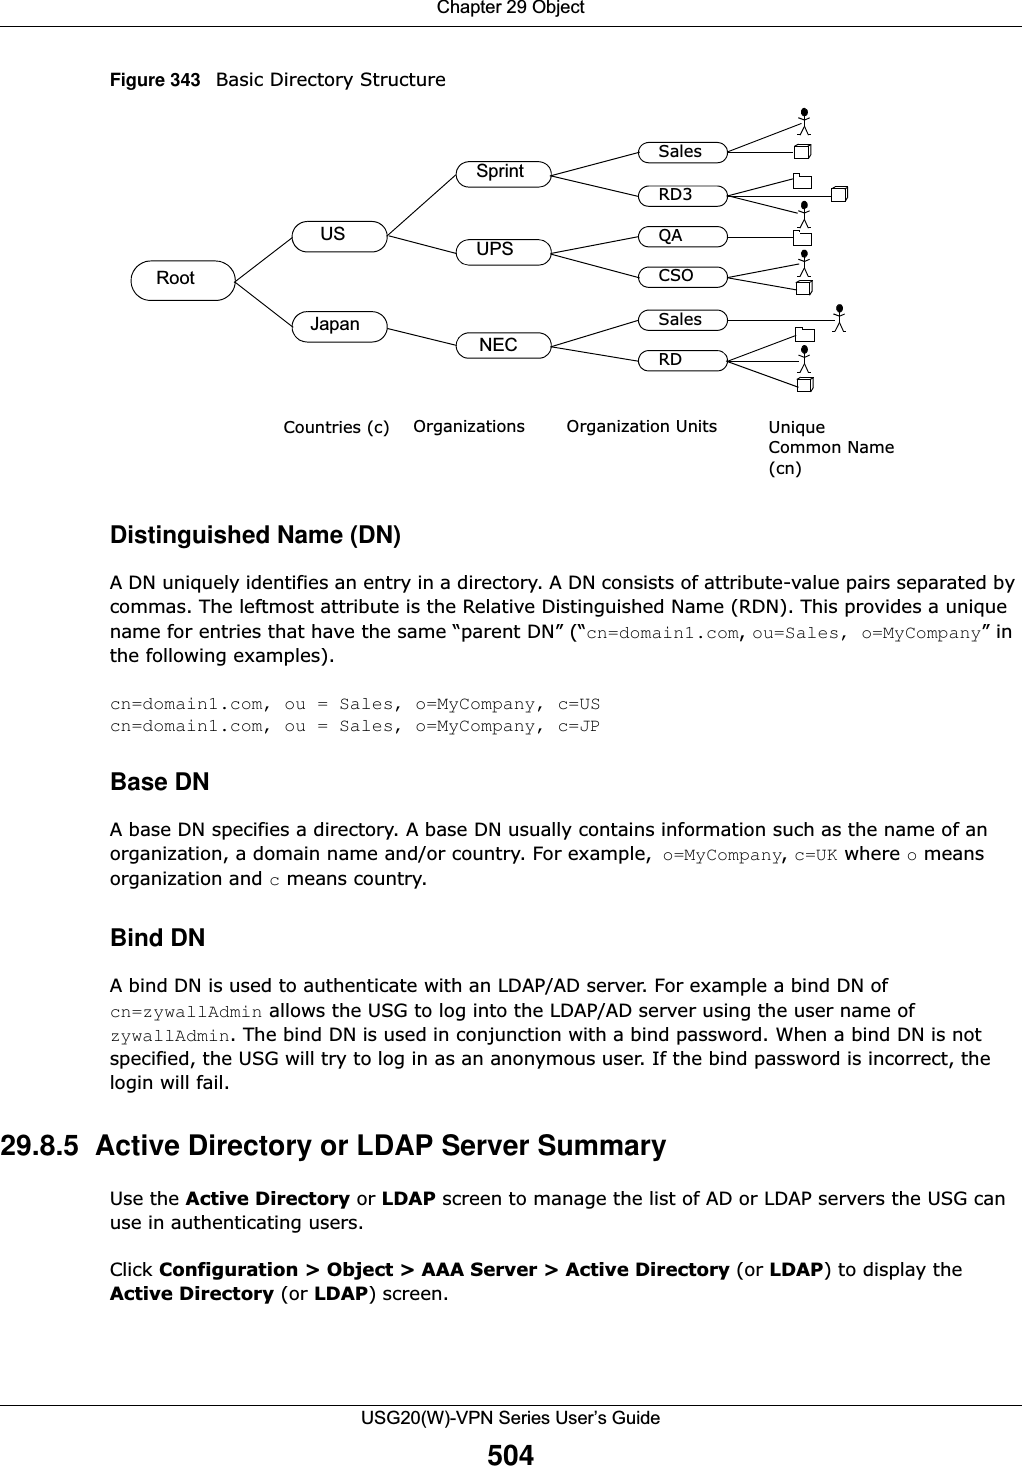 Chapter 29 ObjectUSG20(W)-VPN Series User’s Guide504Figure 343   Basic Directory Structure Distinguished Name (DN) A DN uniquely identifies an entry in a directory. A DN consists of attribute-value pairs separated by commas. The leftmost attribute is the Relative Distinguished Name (RDN). This provides a unique name for entries that have the same “parent DN” (“cn=domain1.com, ou=Sales, o=MyCompany” in the following examples). cn=domain1.com, ou = Sales, o=MyCompany, c=UScn=domain1.com, ou = Sales, o=MyCompany, c=JPBase DN A base DN specifies a directory. A base DN usually contains information such as the name of an organization, a domain name and/or country. For example, o=MyCompany, c=UK where o means organization and c means country. Bind DN A bind DN is used to authenticate with an LDAP/AD server. For example a bind DN of cn=zywallAdmin allows the USG to log into the LDAP/AD server using the user name of zywallAdmin. The bind DN is used in conjunction with a bind password. When a bind DN is not specified, the USG will try to log in as an anonymous user. If the bind password is incorrect, the login will fail.29.8.5  Active Directory or LDAP Server SummaryUse the Active Directory or LDAP screen to manage the list of AD or LDAP servers the USG can use in authenticating users. Click Configuration &gt; Object &gt; AAA Server &gt; Active Directory (or LDAP) to display the Active Directory (or LDAP) screen. RootUSJapanSprintUPSNECSalesRD3QACSOSalesRDCountries (c) Organizations  Organization Units  Unique Common Name (cn)